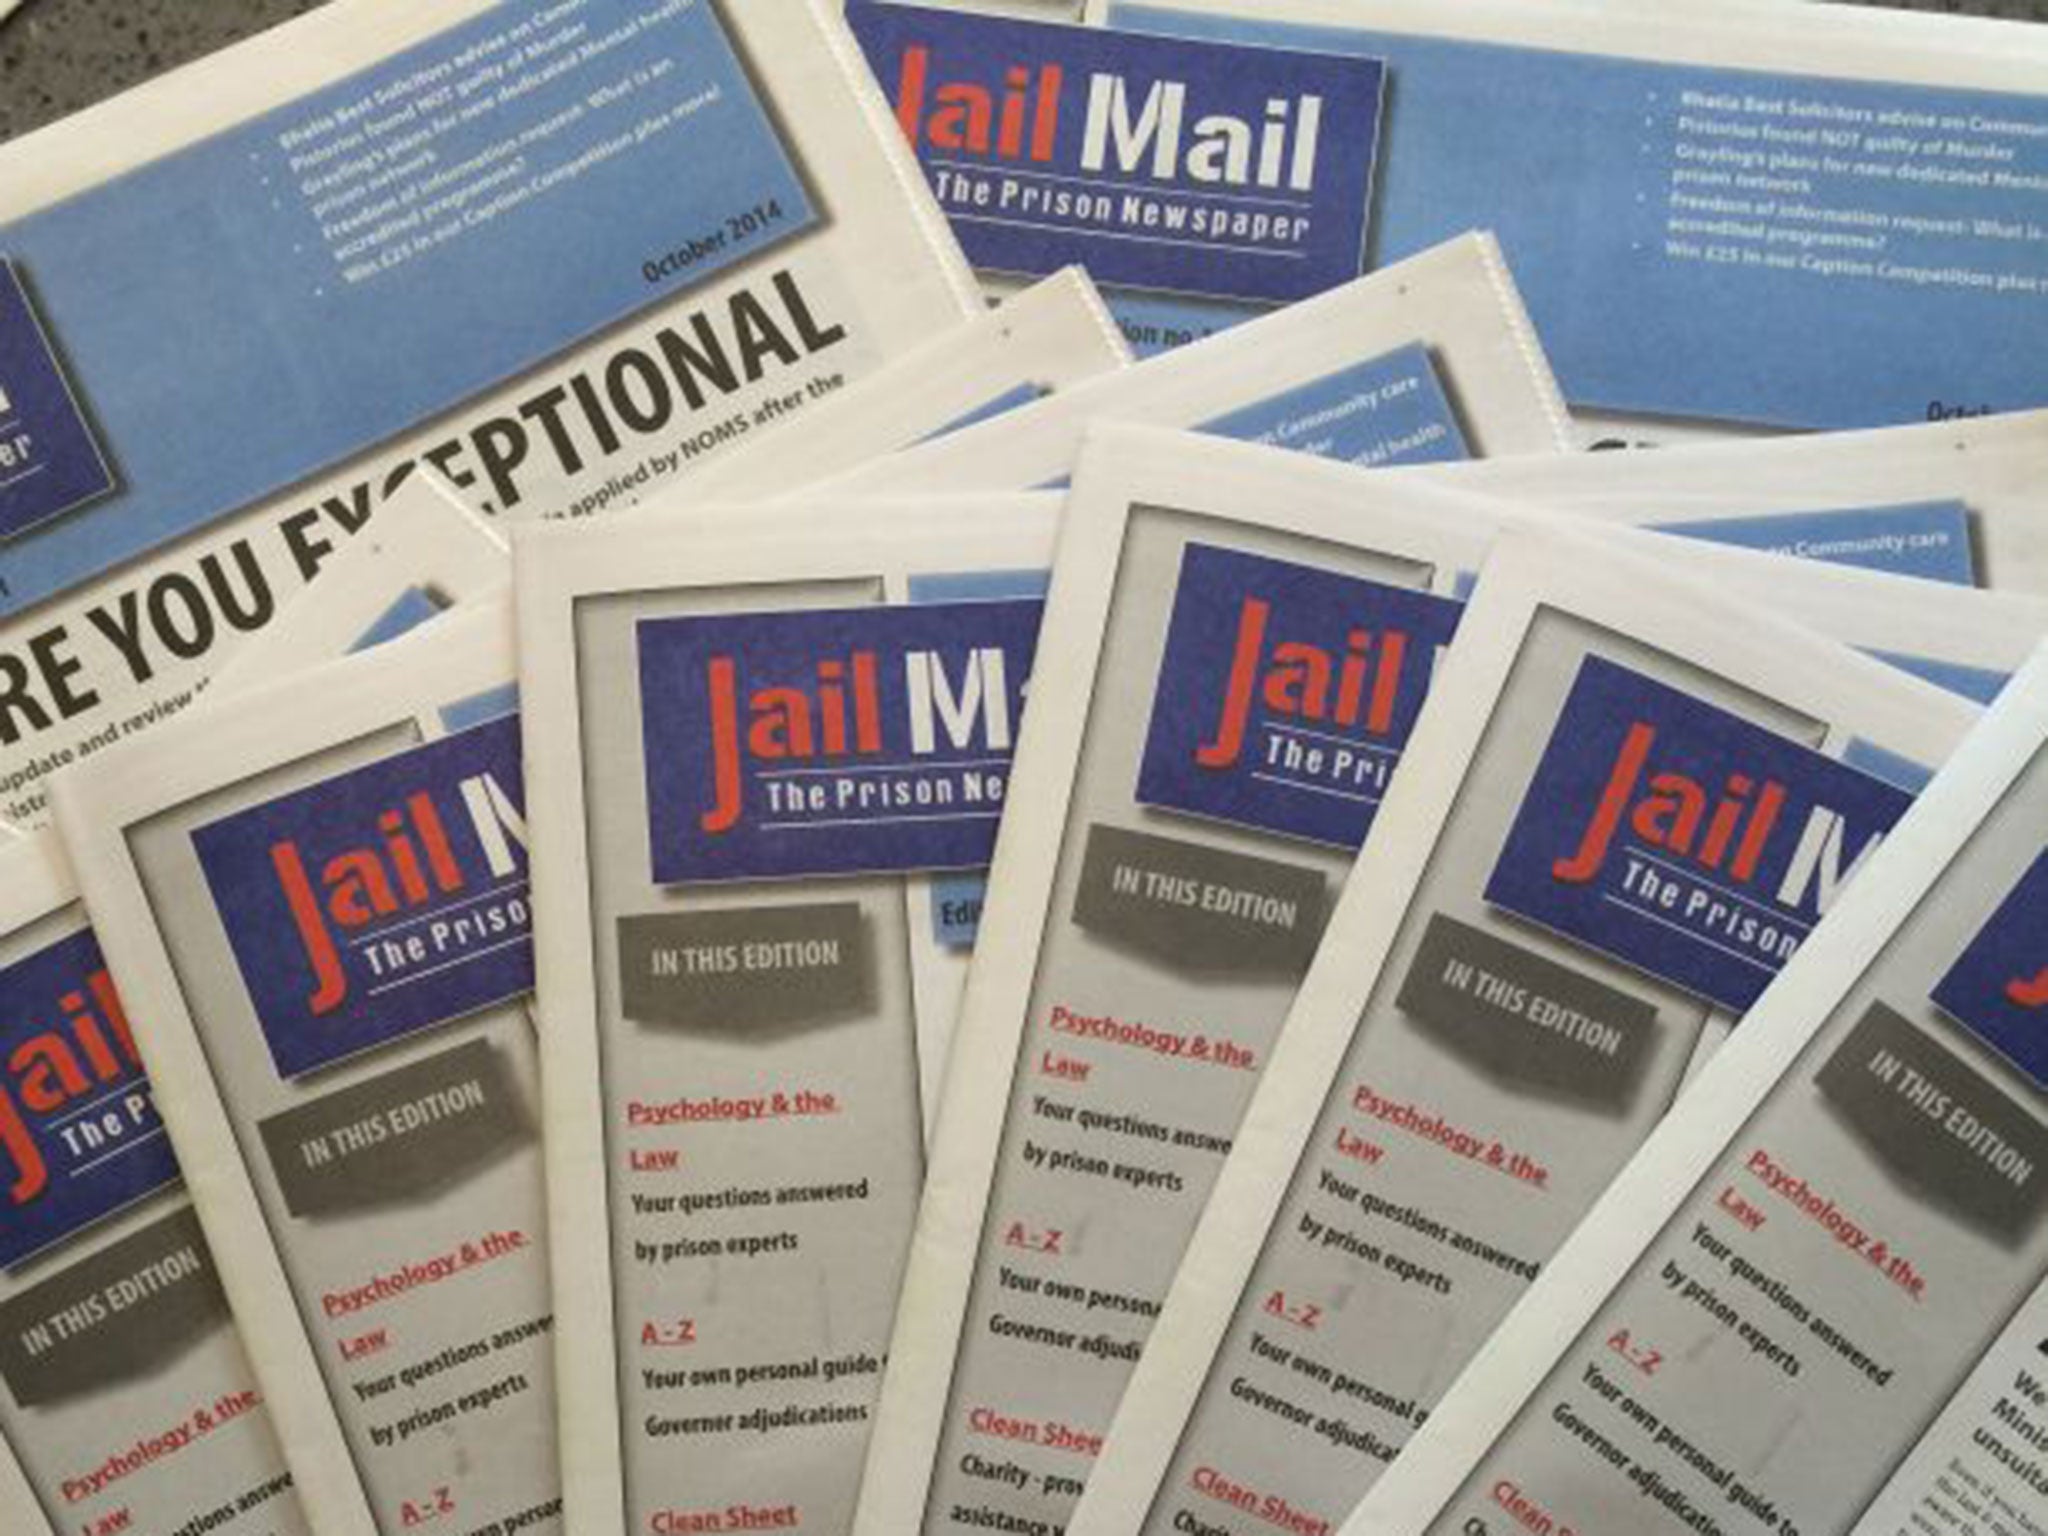 Hard sentences: the first copies of ‘Jail Mail’